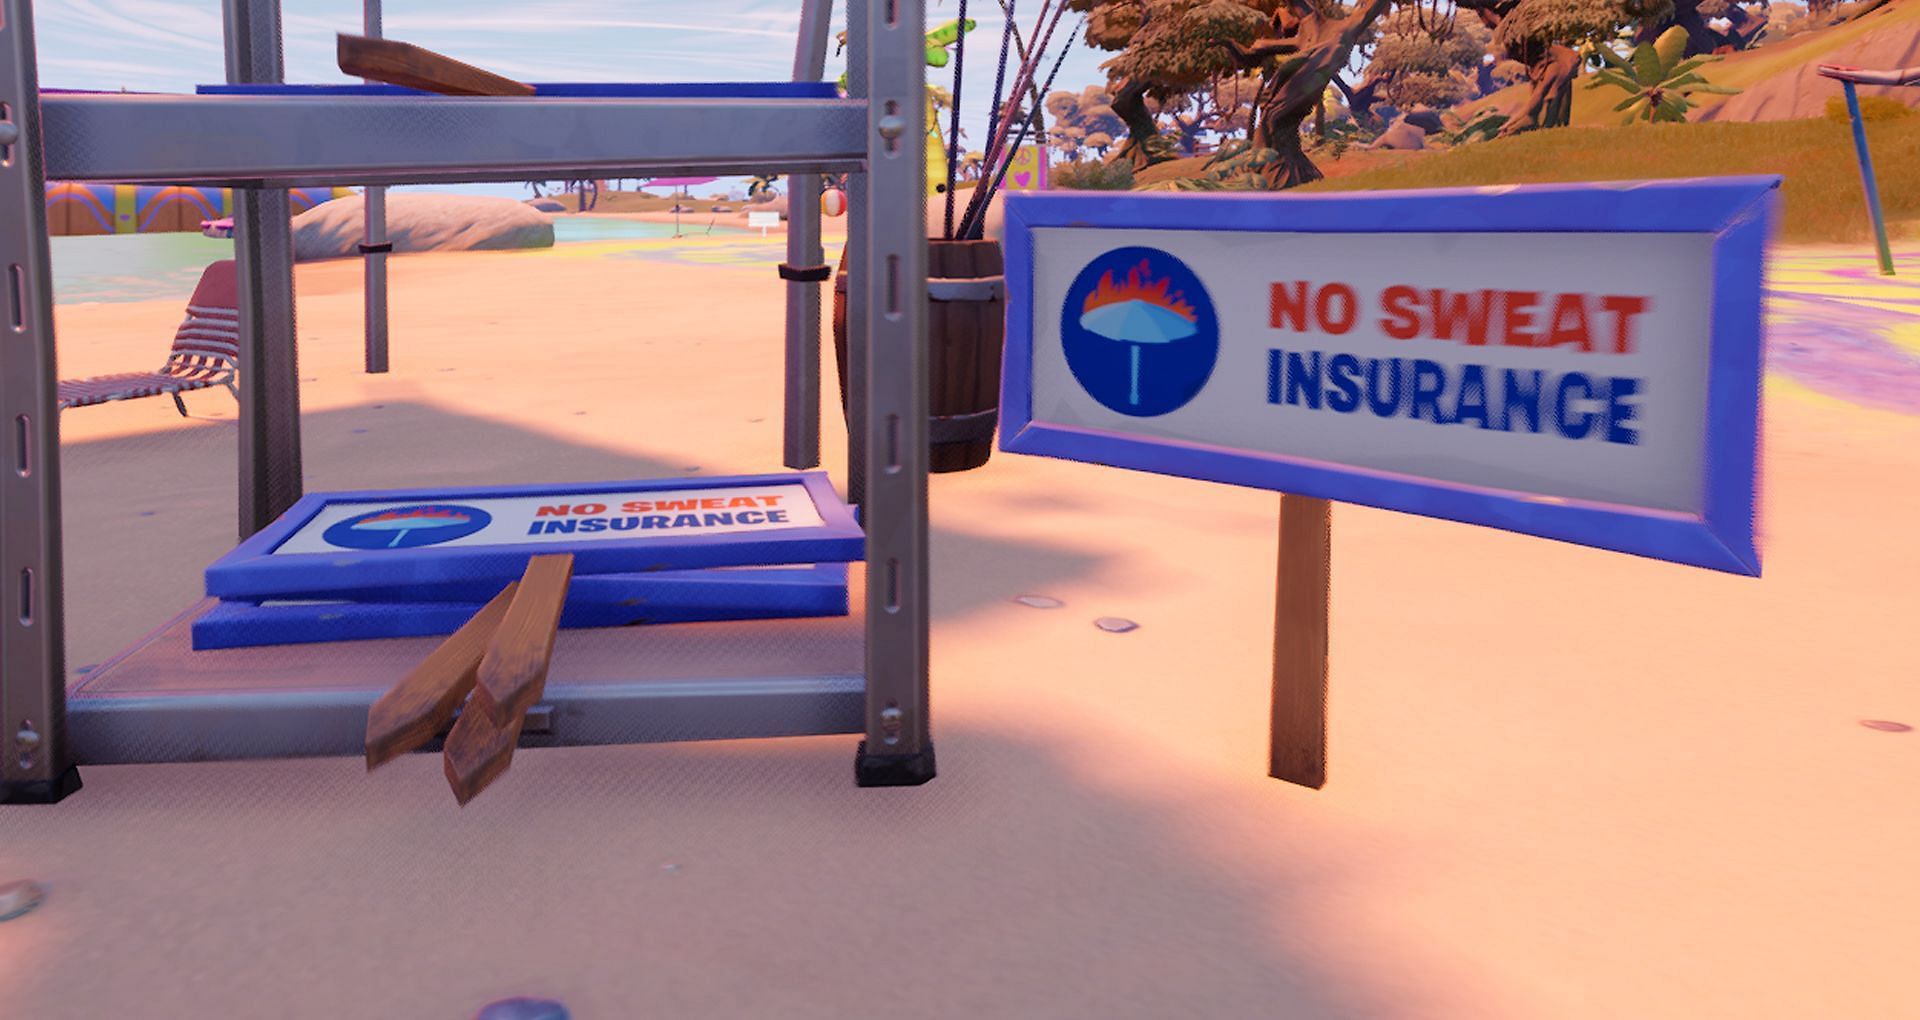 No Sweat Insurance is a rather evil organization in Fortnite Battle Royale (Image via Epic Games)